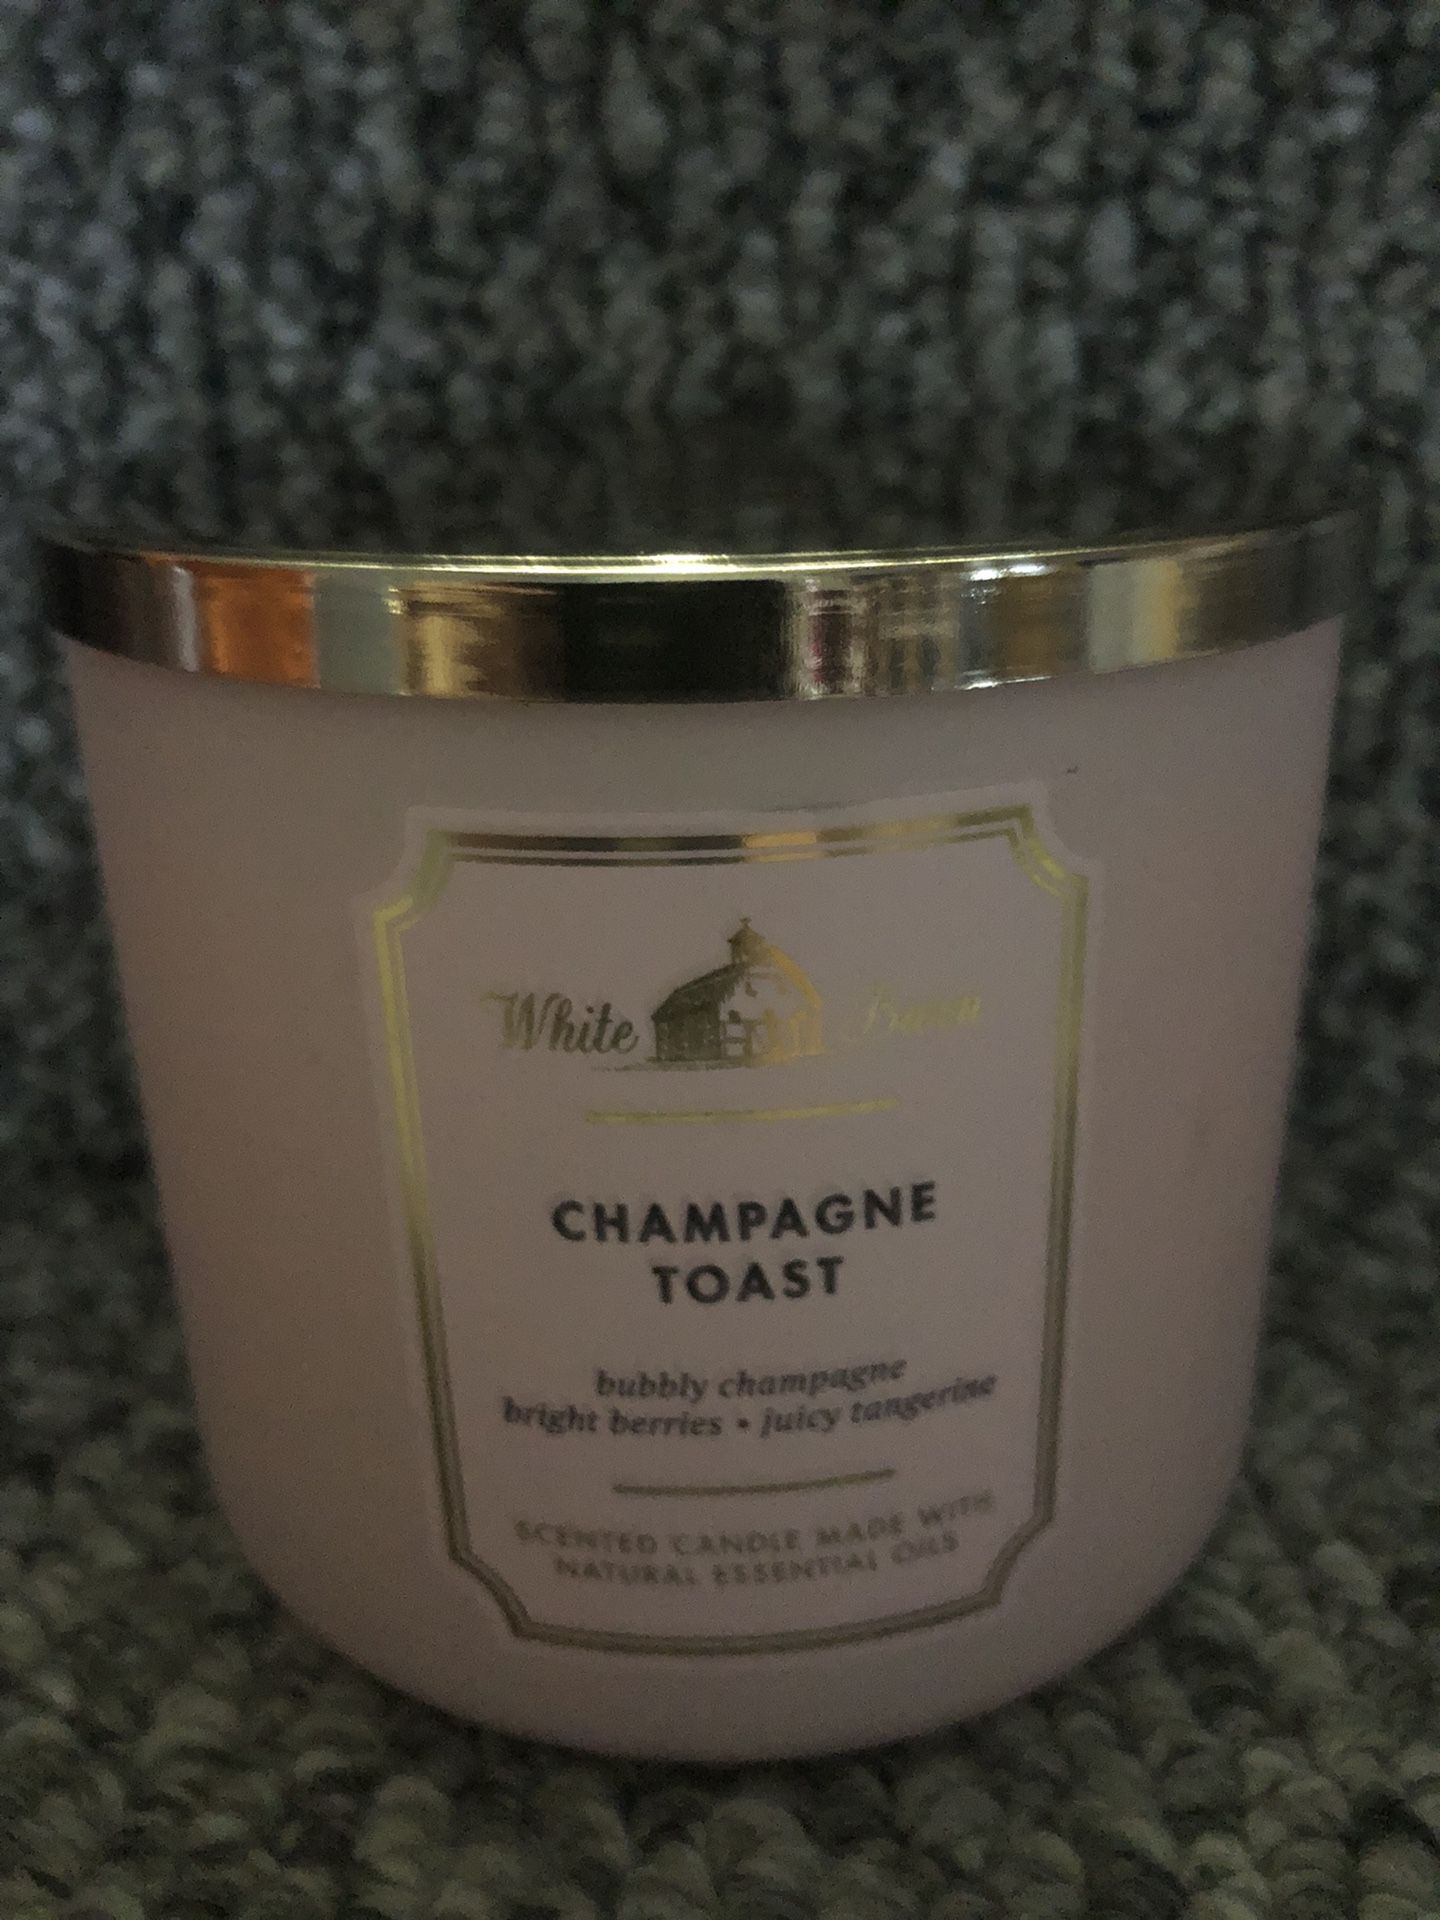 Bath & Body Work Candle Champagne Toast Brand New Great Gift! $14! Get By  1/11! for Sale in Huntingtn Sta, NY - OfferUp